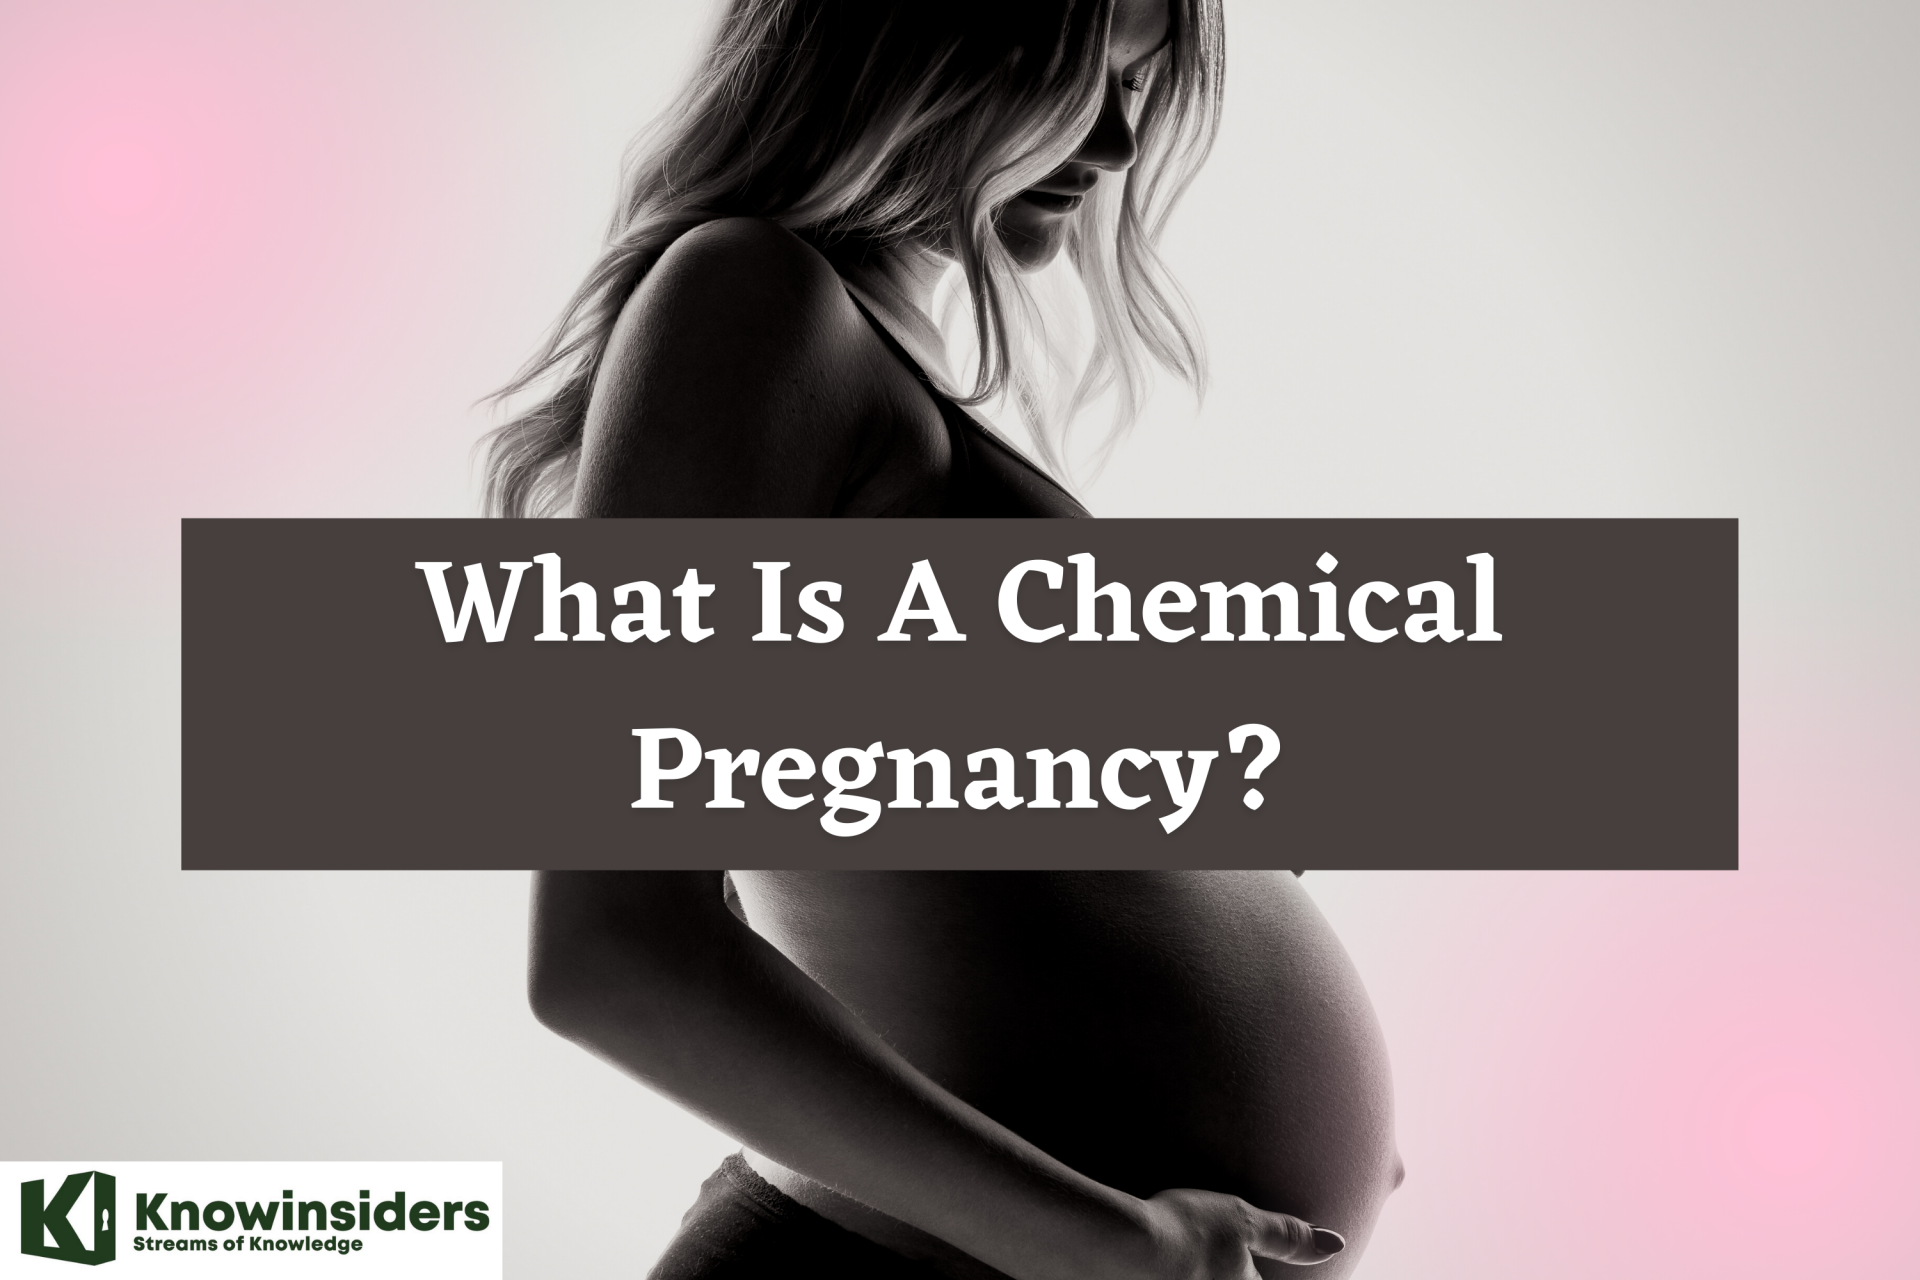 What Is A Chemical Pregnancy?